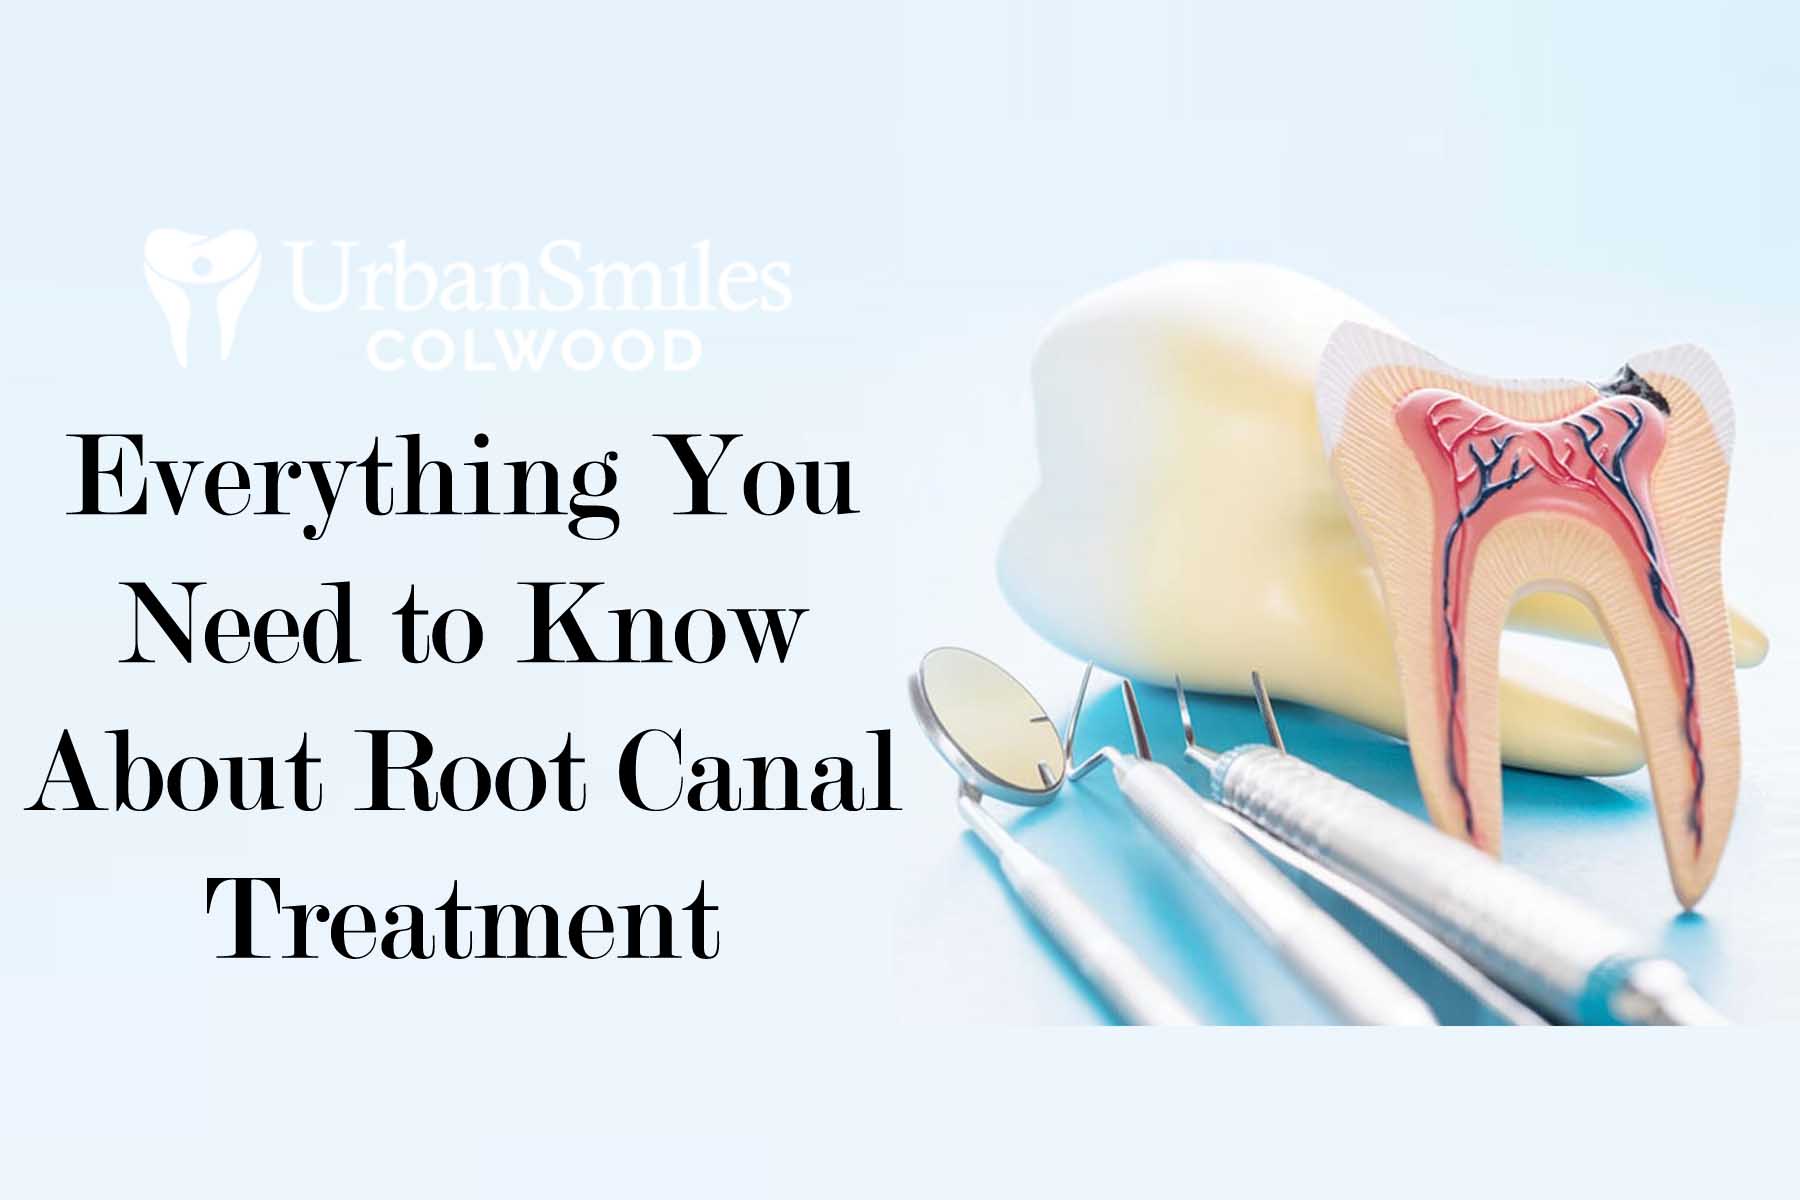 Everything You Need to Know About Root Canal Treatment